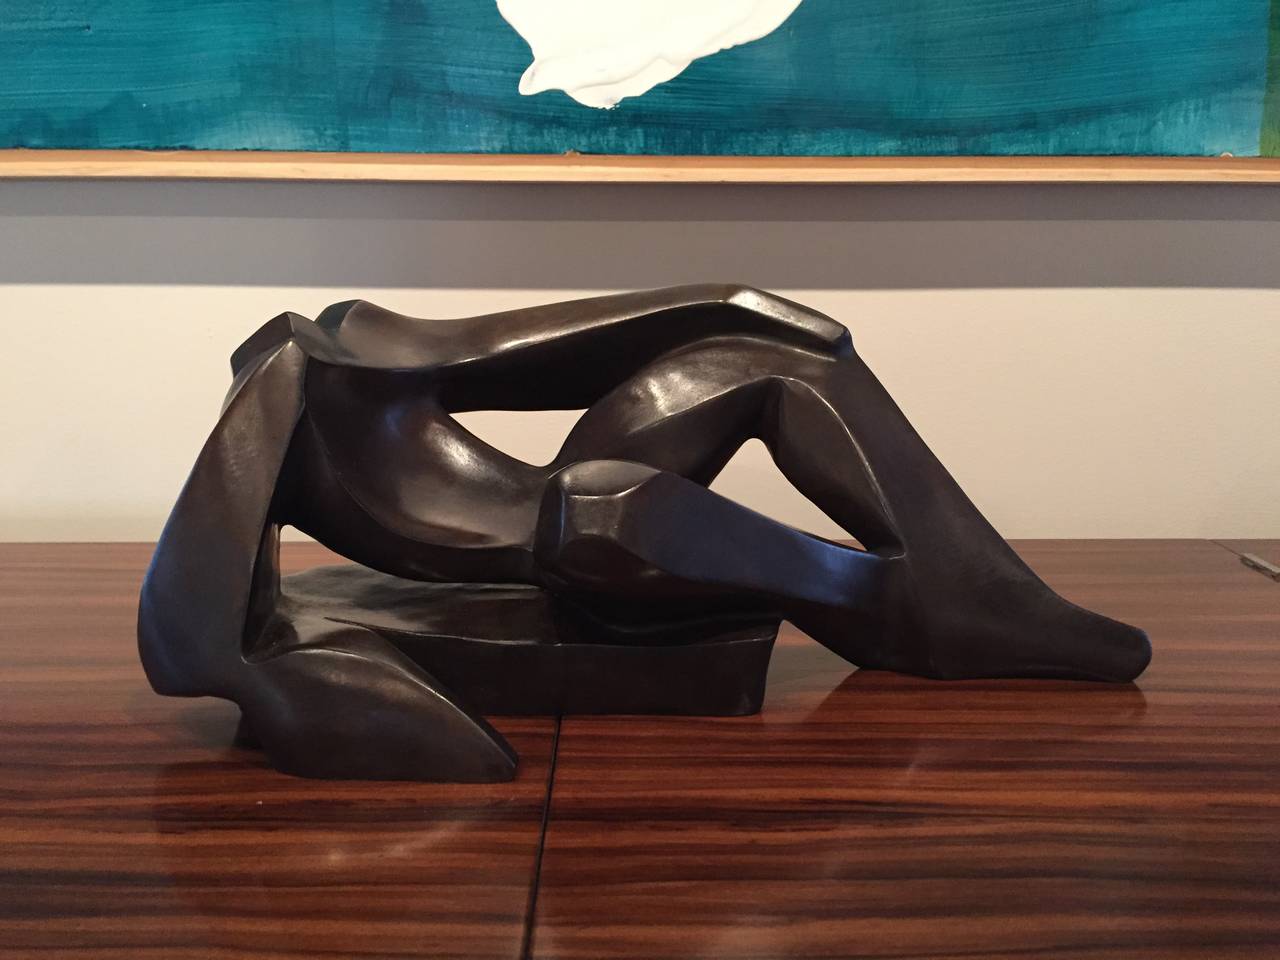 Bronze reclining male figure by Pascale Gallais,
1994
Ed. 4/5
Measures: Height 5 1/2 in., width 3 1/2 in.